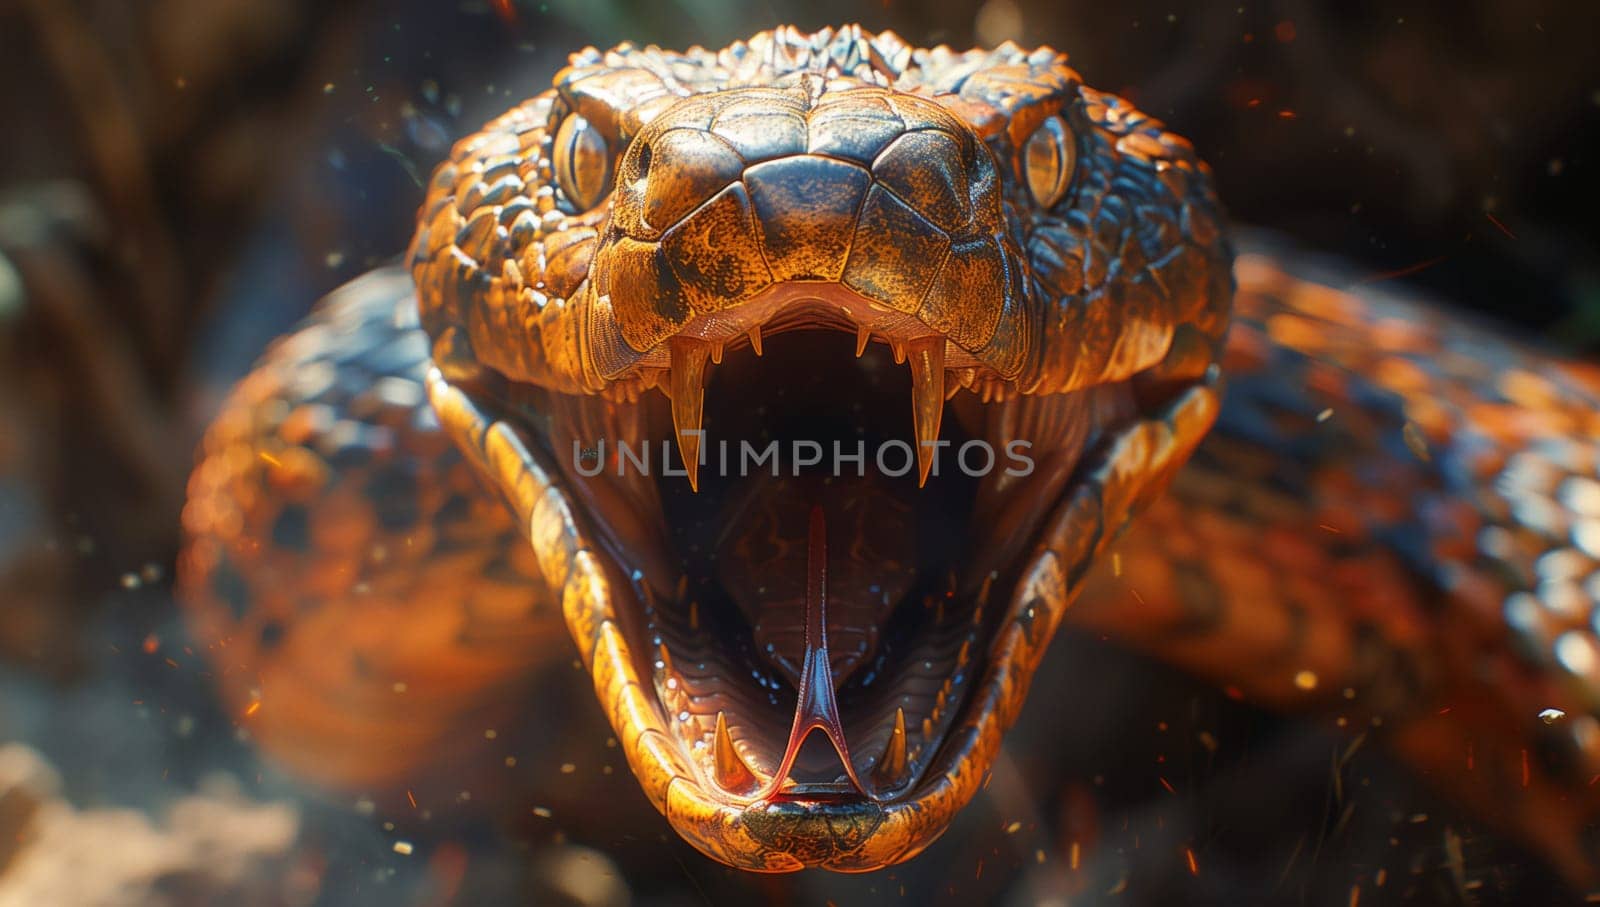 A close up shot of a terrestrial animal, a scaled reptile with its jaw open, showcasing its fangs and snout. This macro photography captures the wildlife underwater